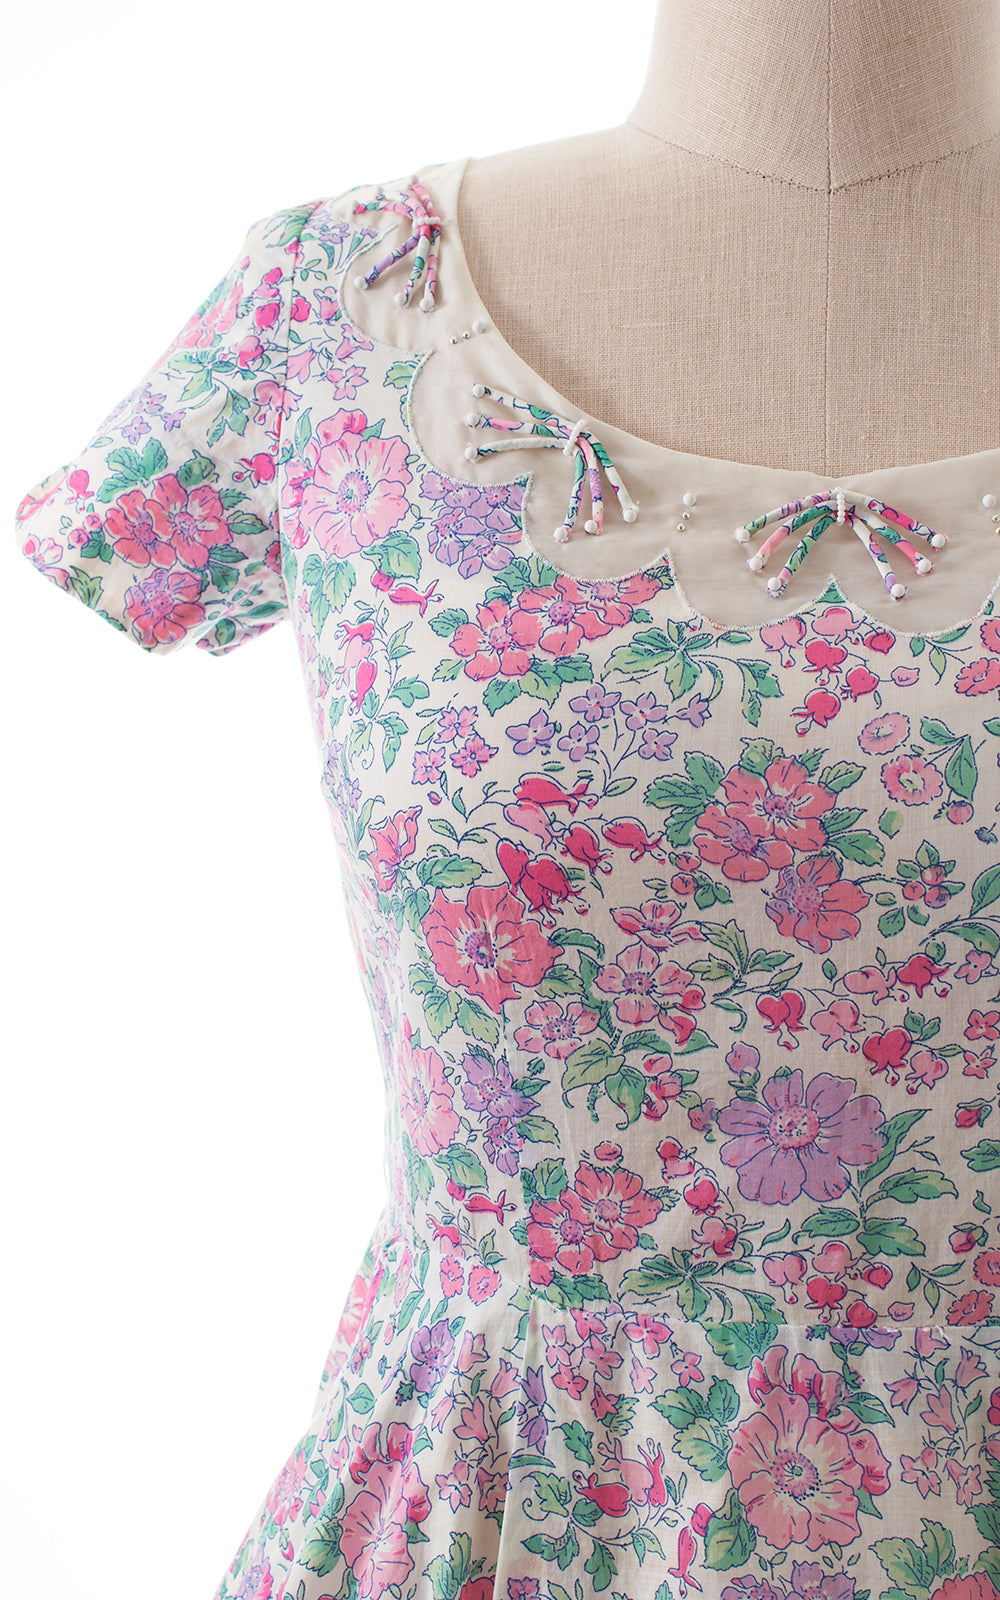 1950s LIBERTY OF LONDON Floral Dress with Pockets | large